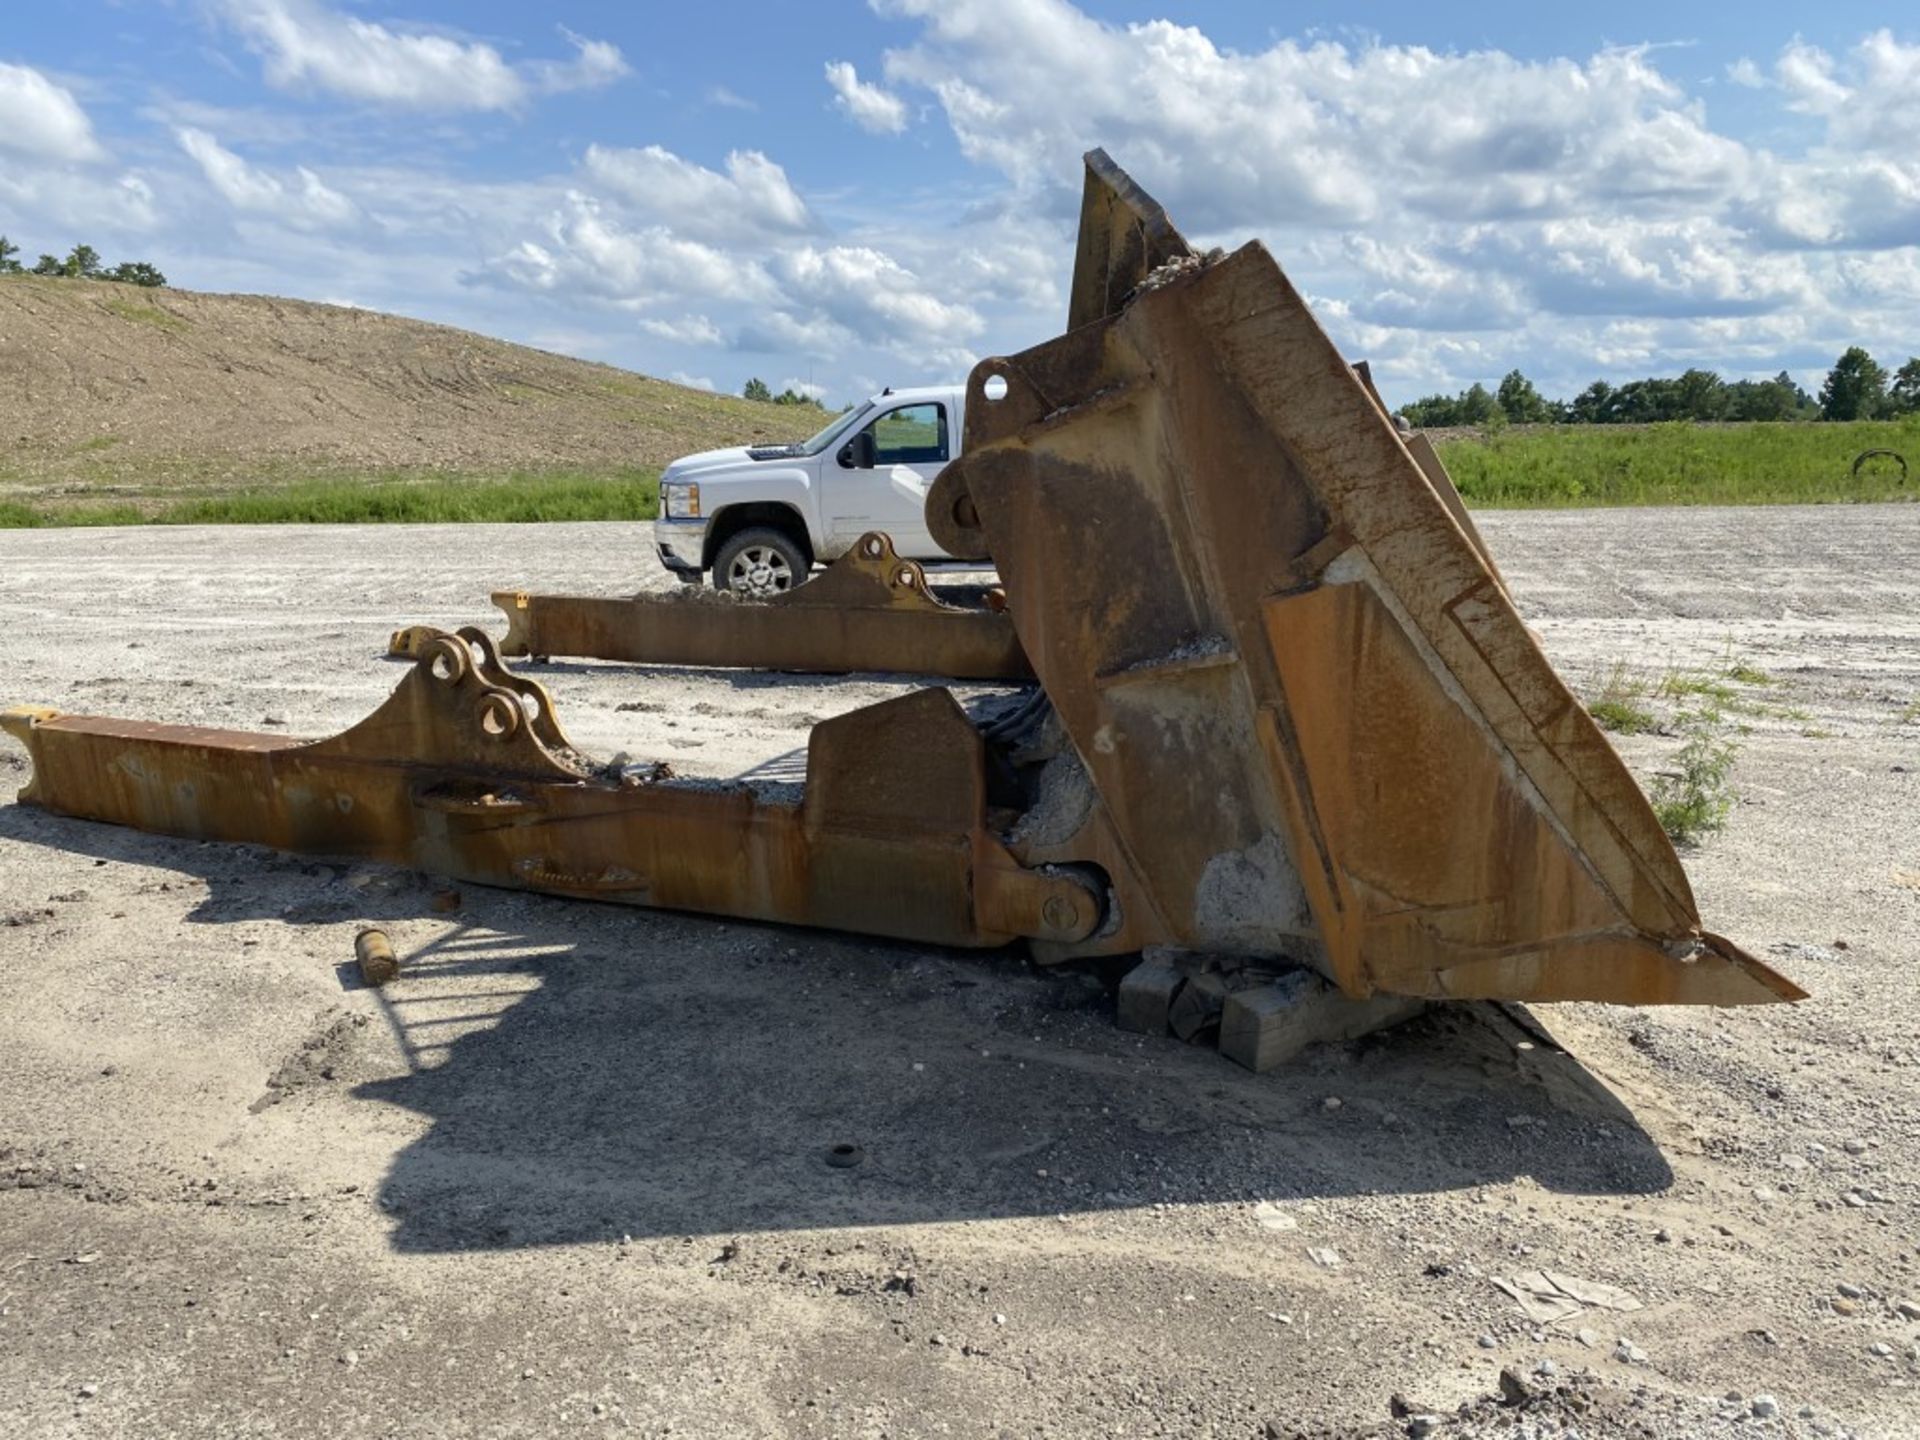 CATERPILLAR DOZER BLADE WITH SIDE BRACKETS, 20'6'' WIDE, COMES WITH (2) USED TRACK SECTIONS AND A - Image 3 of 8